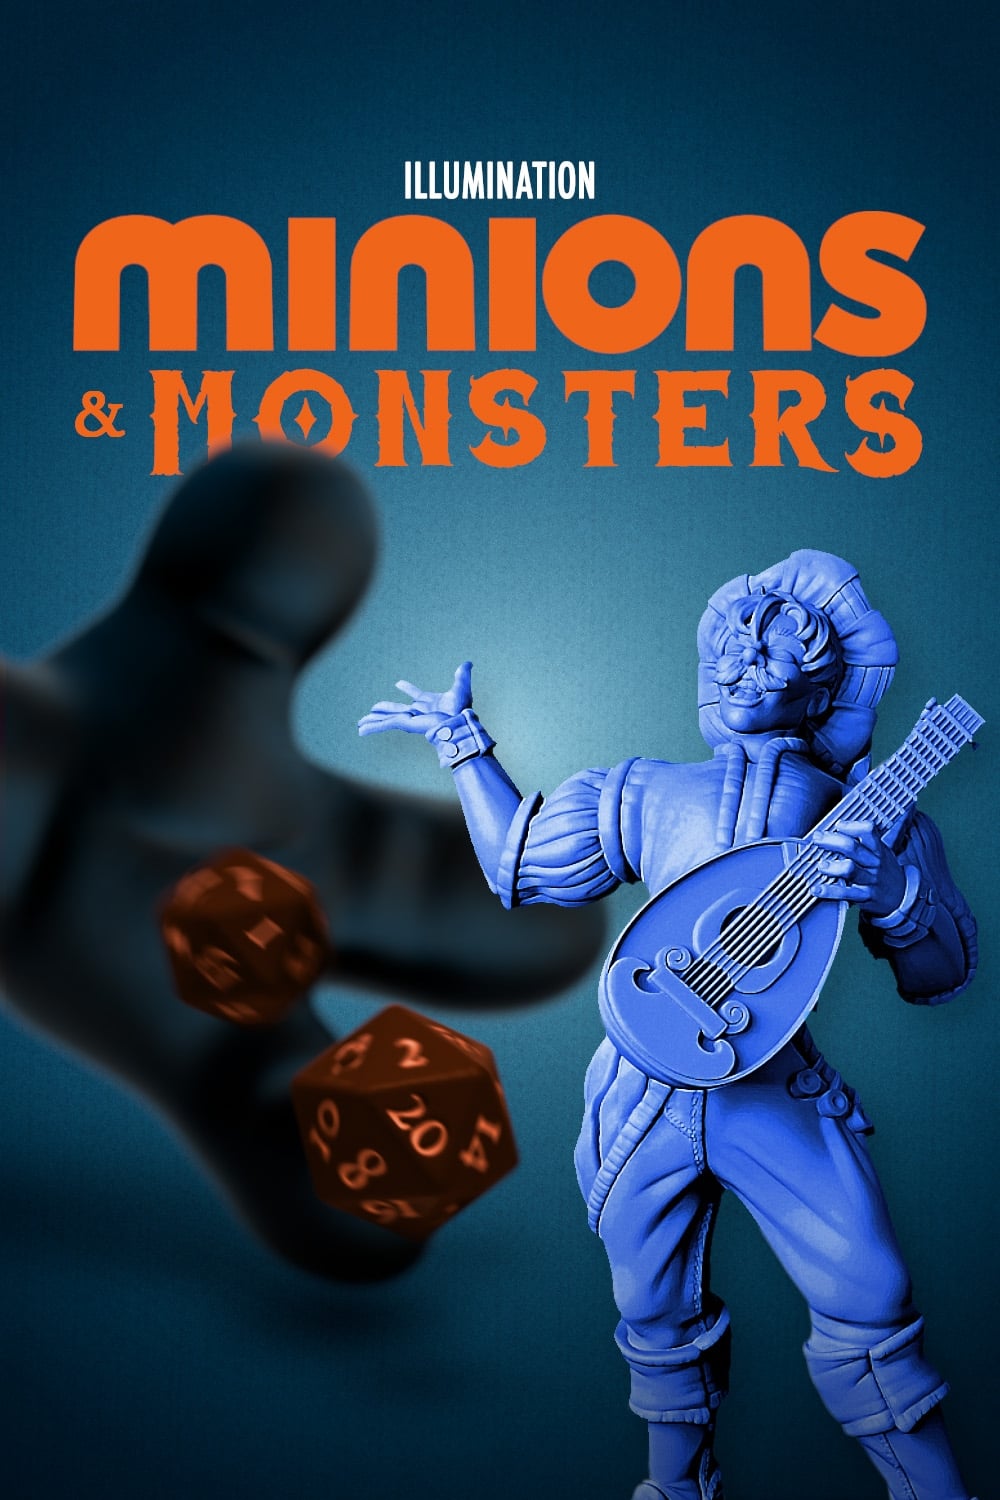 Minions & Monsters